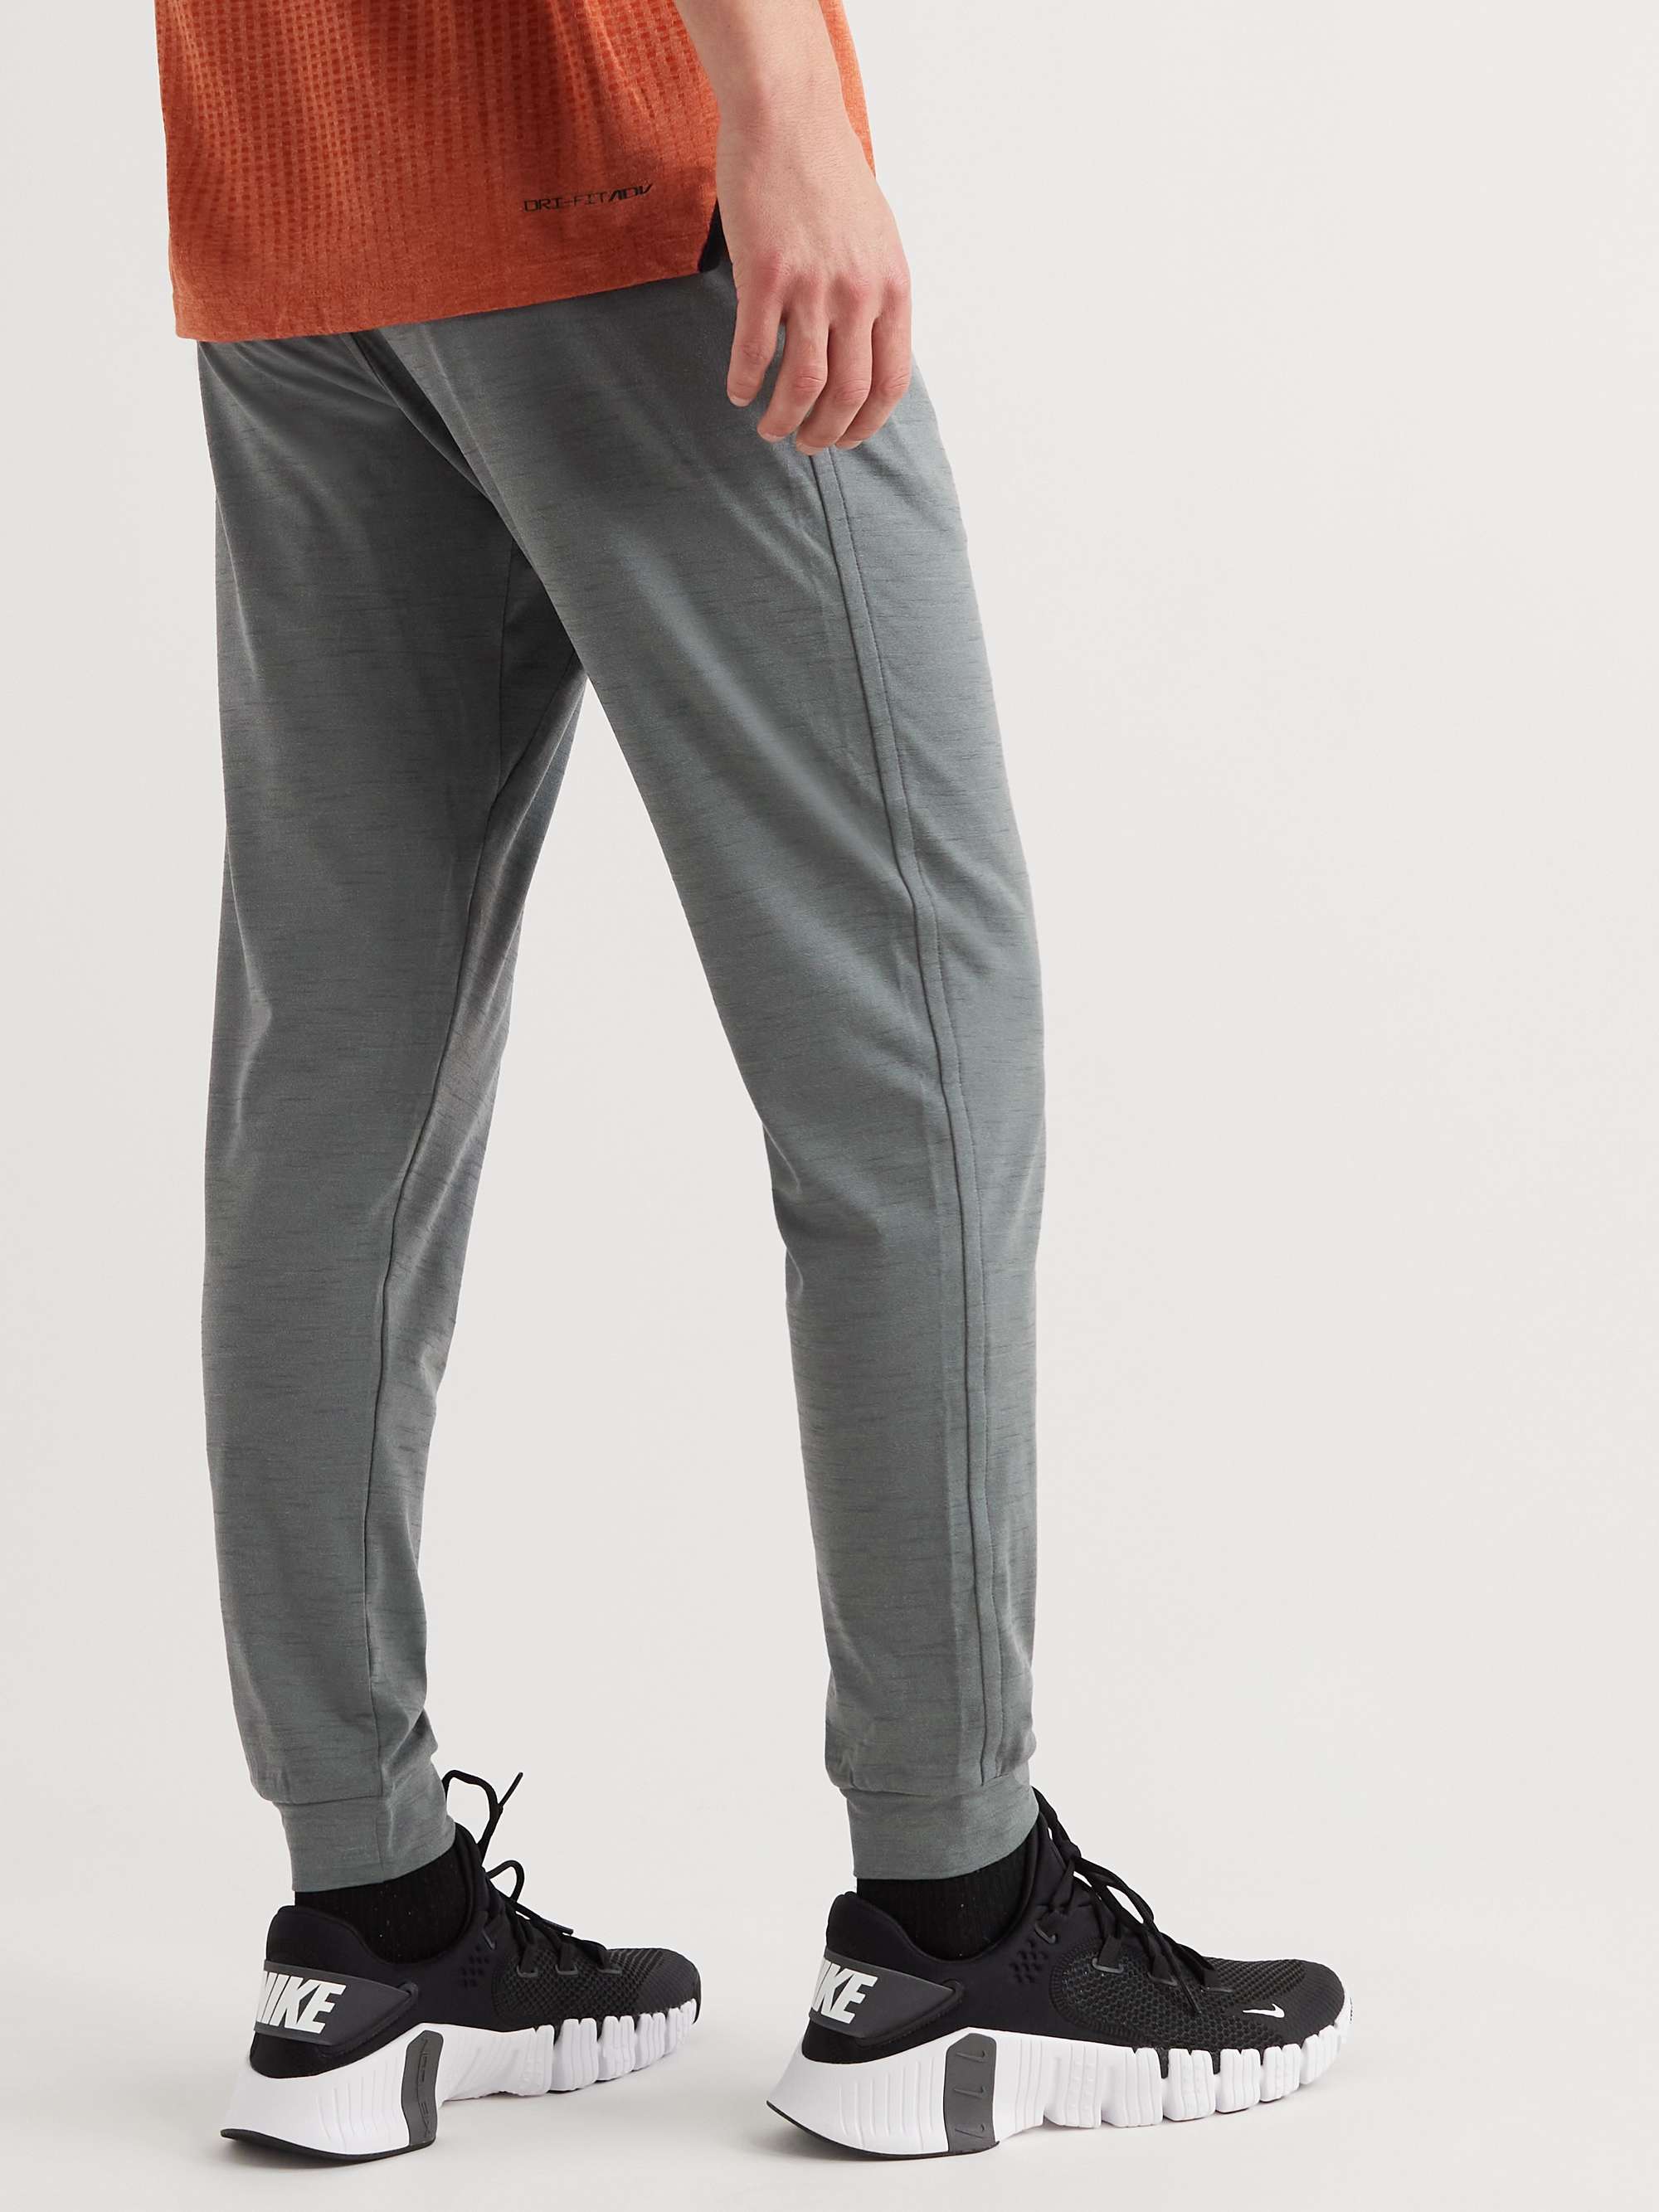 NIKE TRAINING Slim-Fit Tapered Dri-FIT Recycled Jersey Training Sweatpants